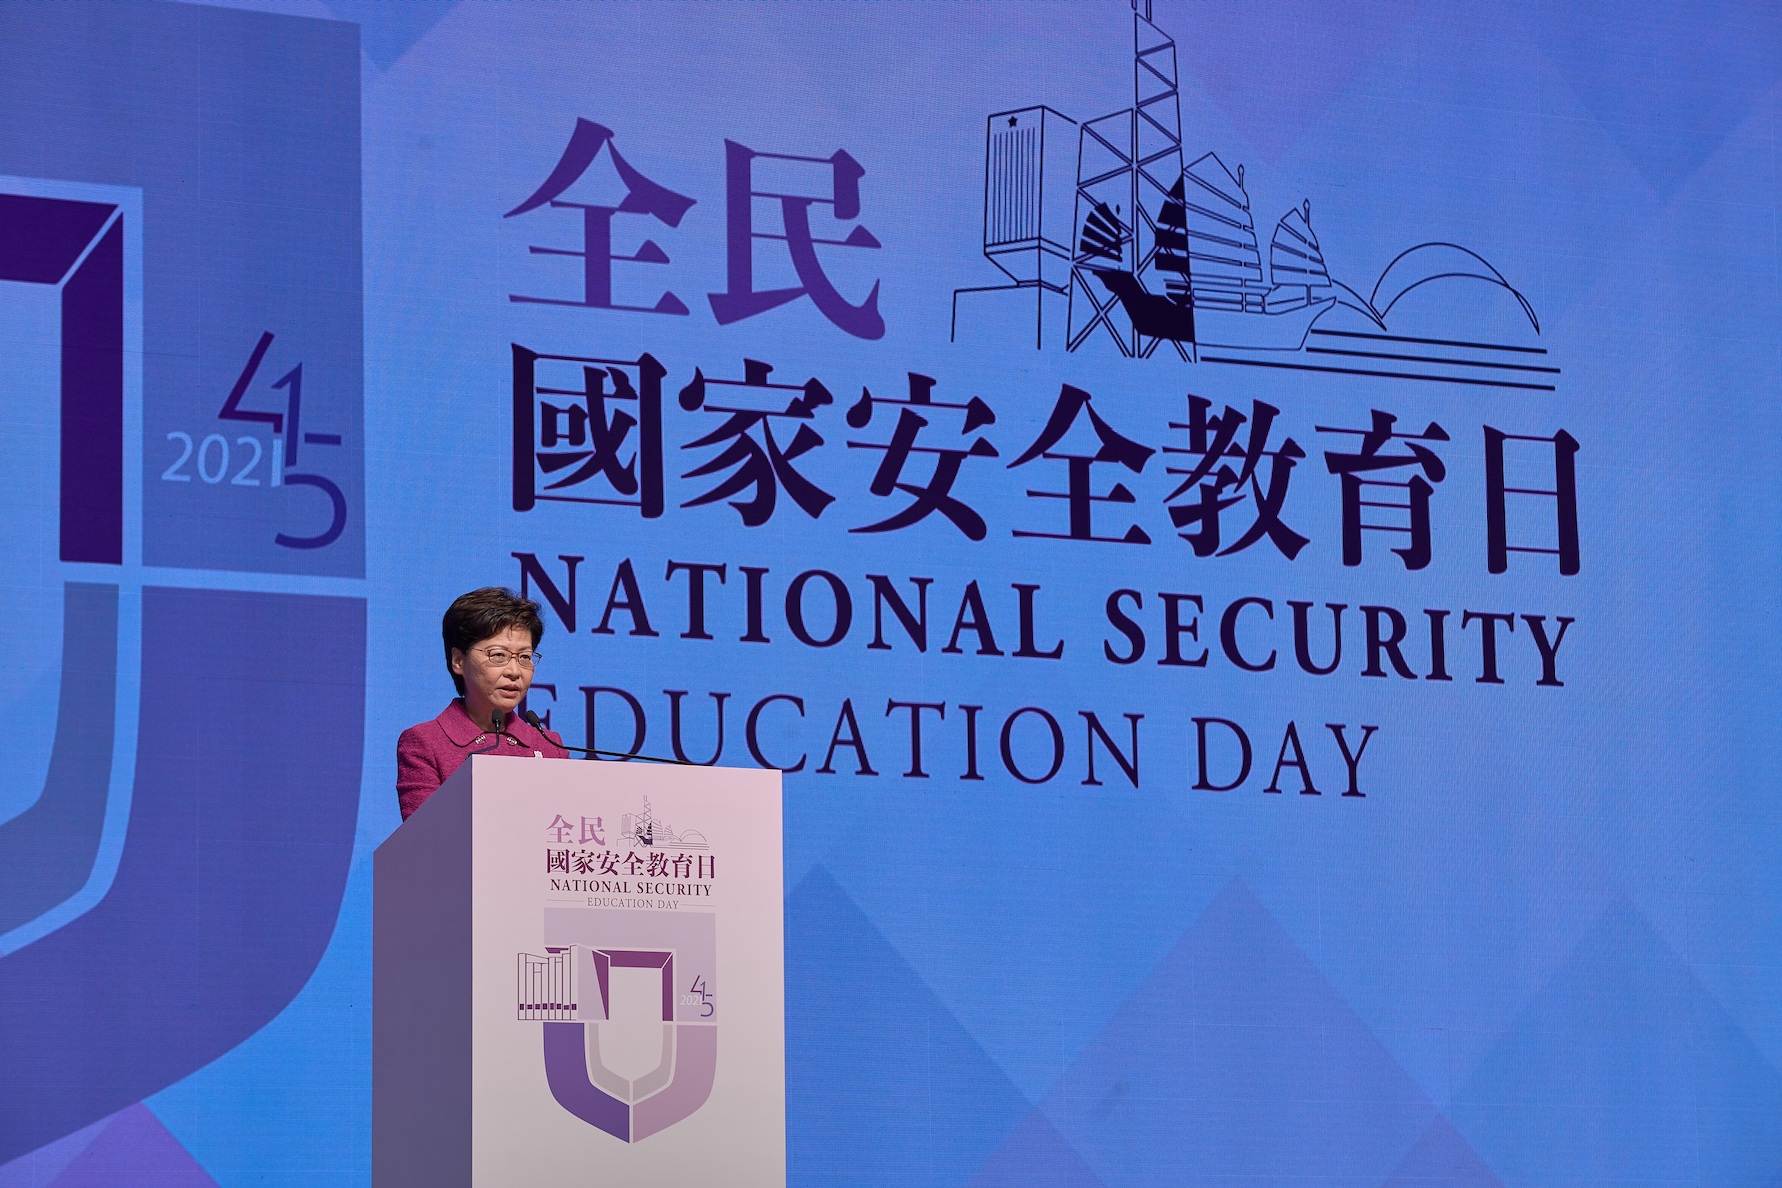 Ms. Lam Cheng Yuet-ngor gave a speech on stage